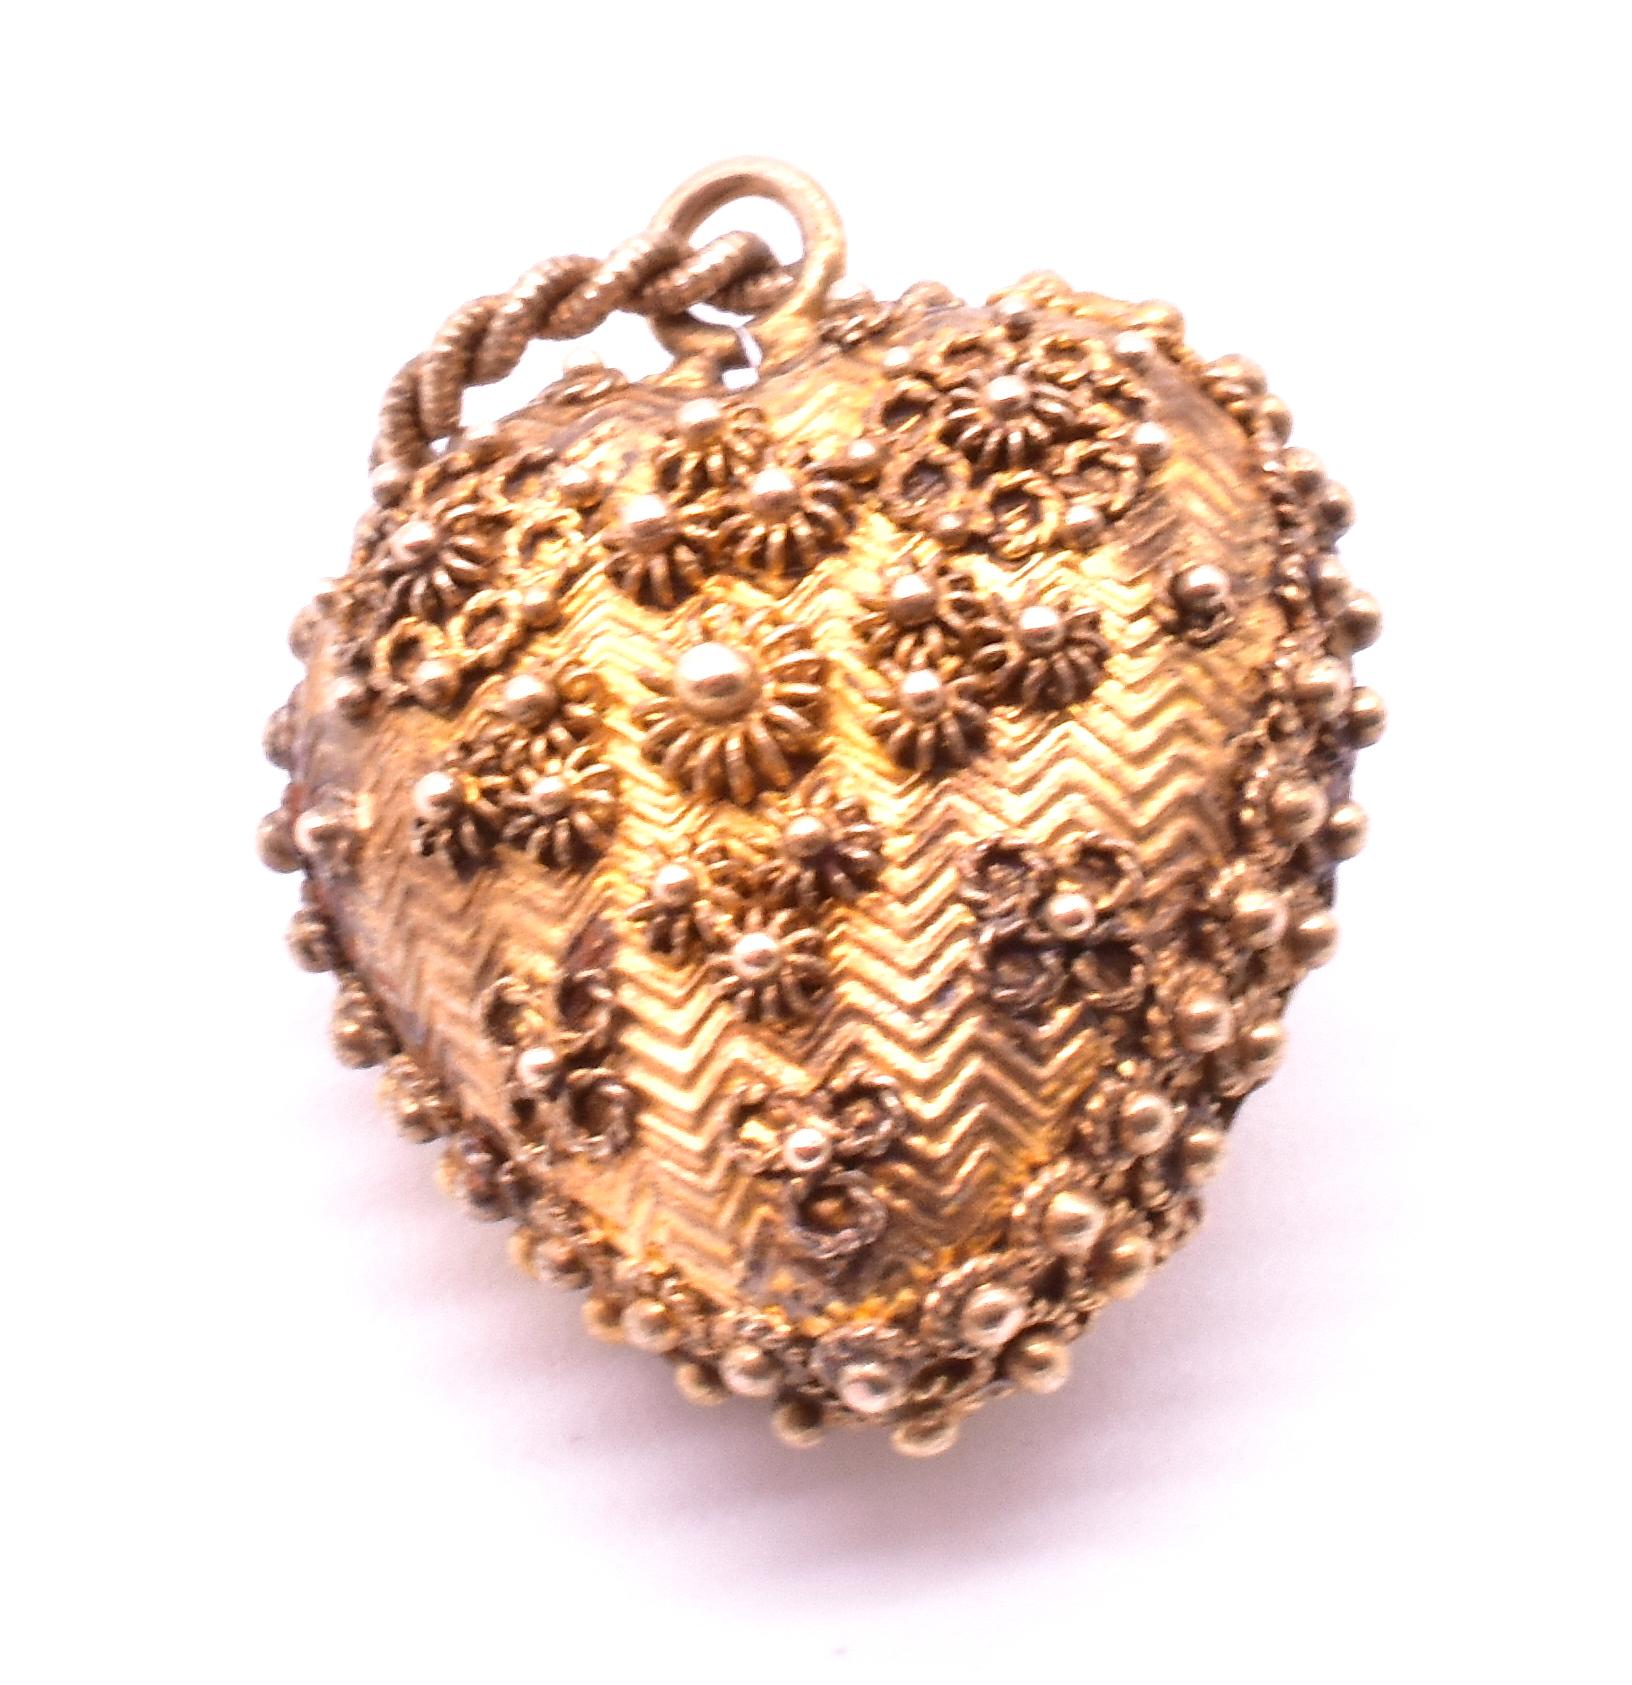 The heart was the universal symbol of love for the Georgians. Heart pendants were given as love tokens, an affirmation of love between couples. Our pendant is a locket for hair and it opens beautifully, has 2 differently embellished sides, and can